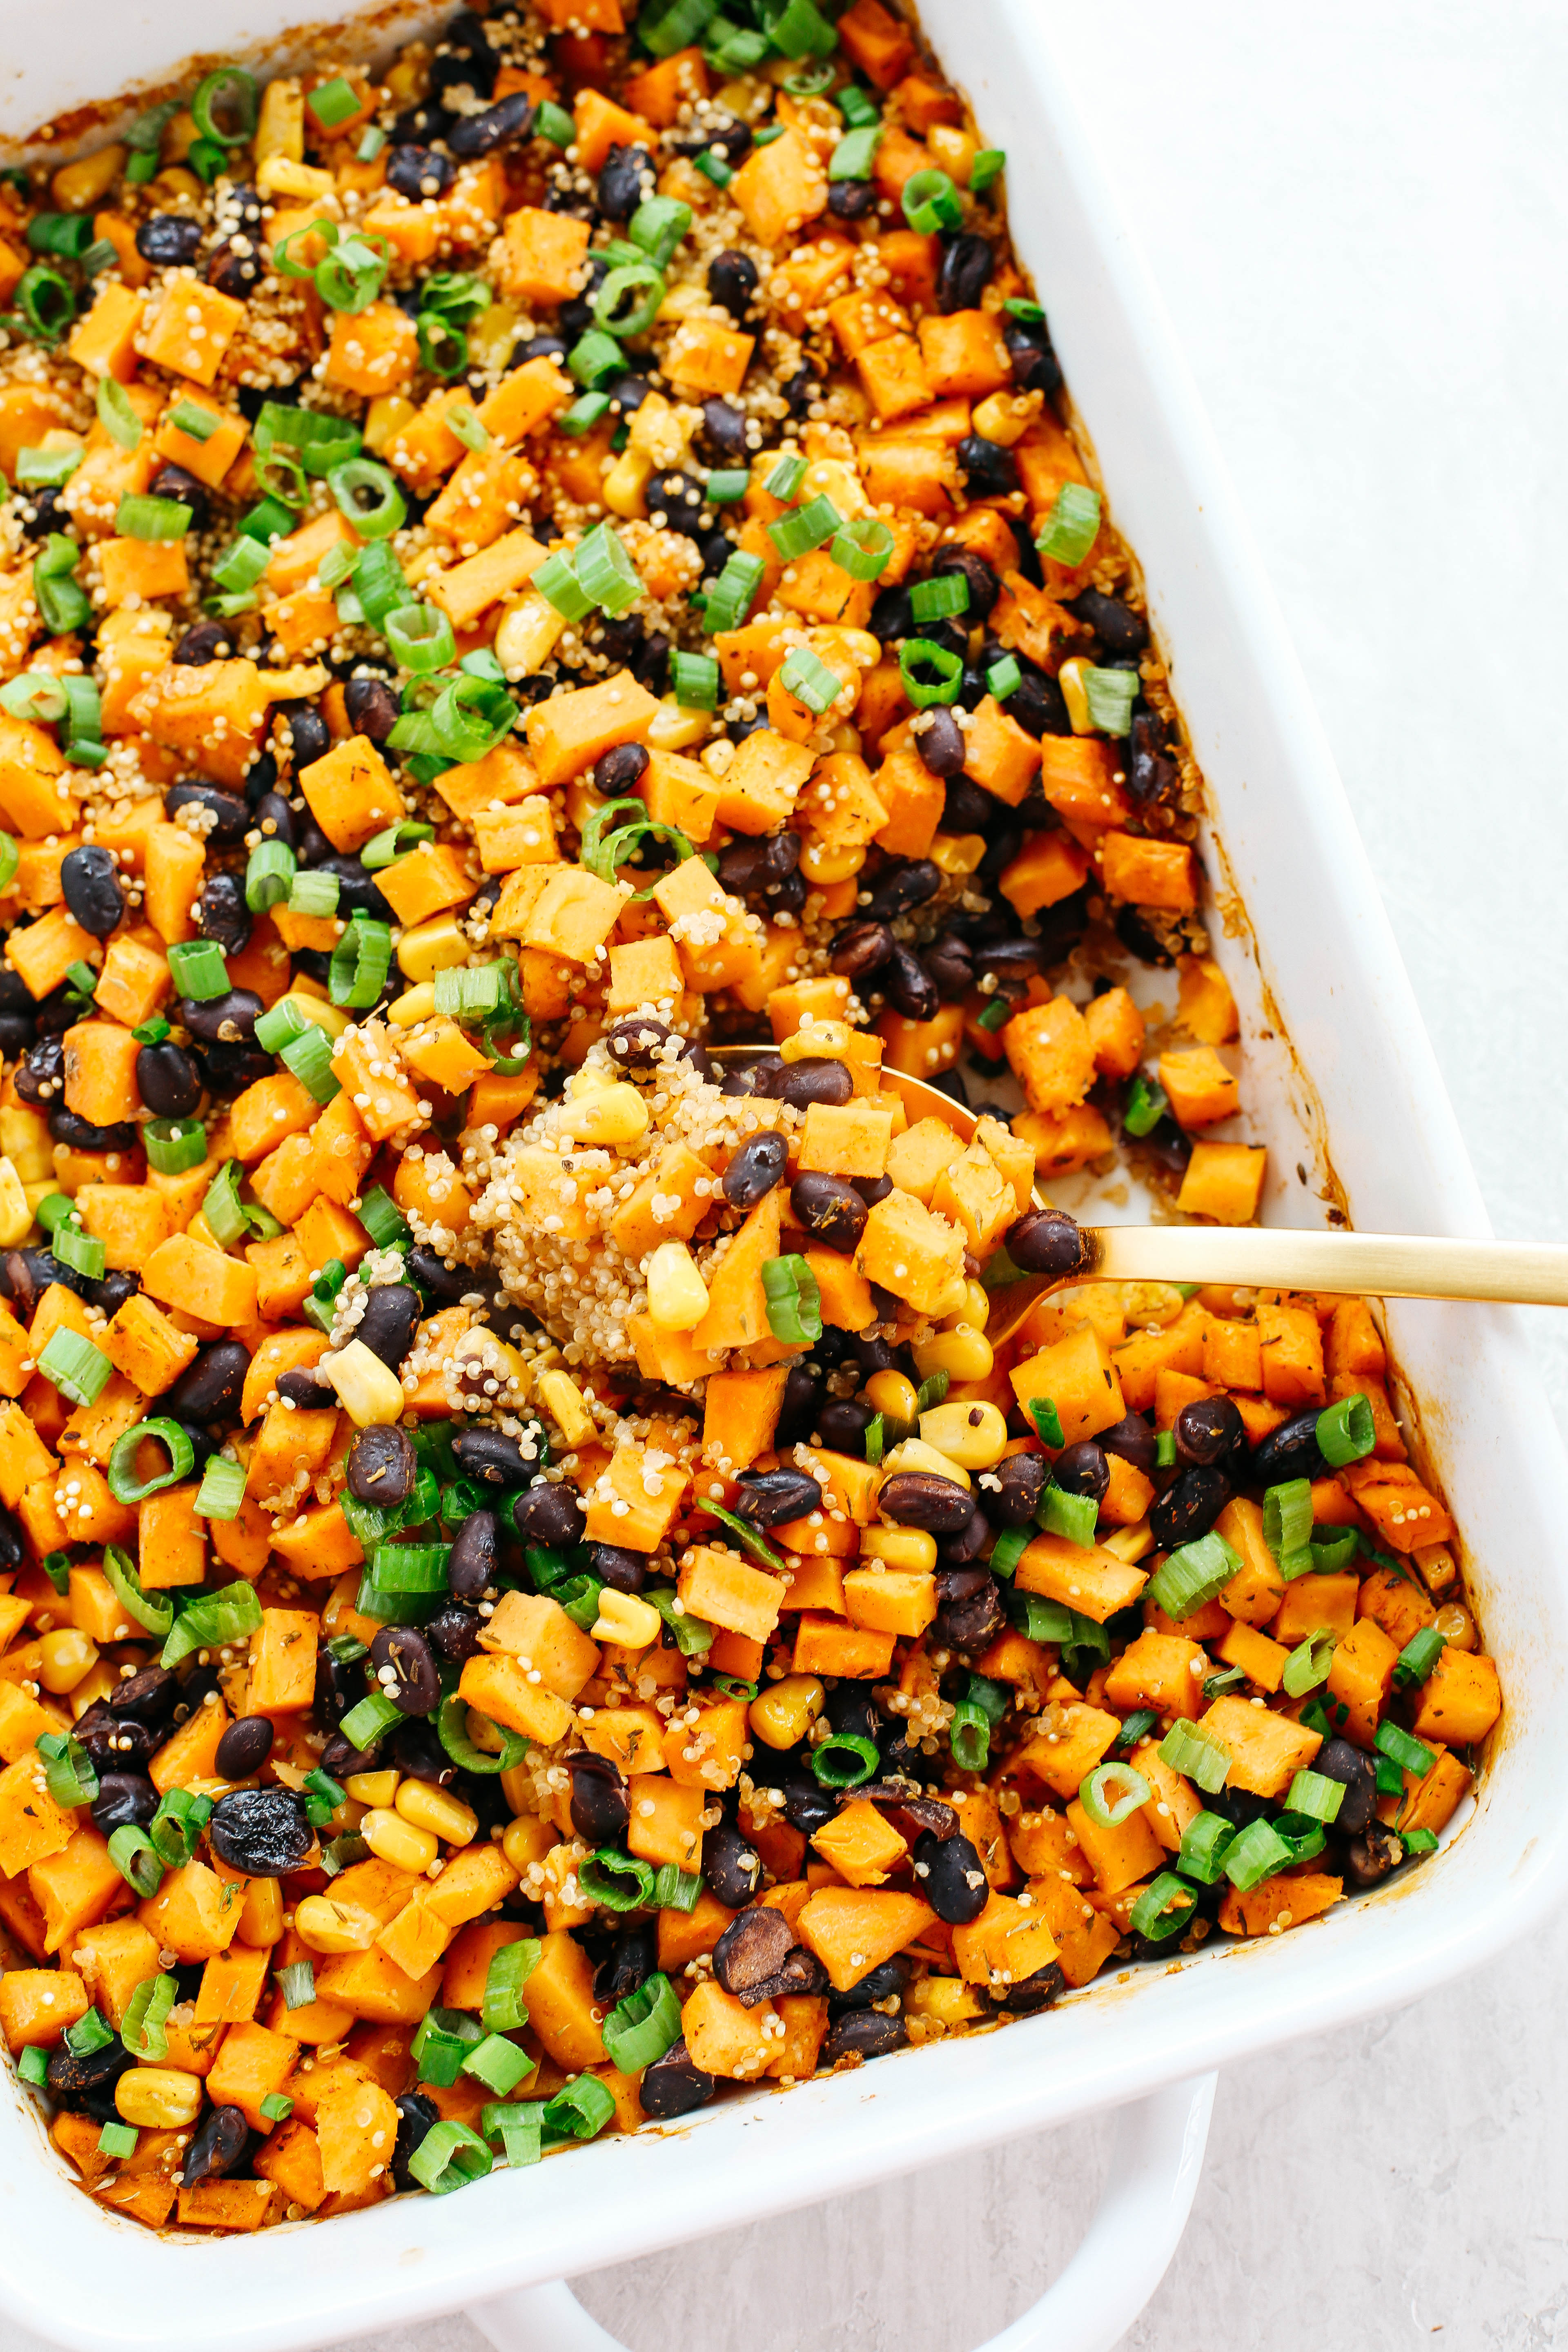 This Sweet Potato & Black Bean Quinoa Bake is healthy and delicious with all your favorite Mexican flavors easily baked together in a single casserole dish! #glutenfree #dairyfree #vegan #mealprep